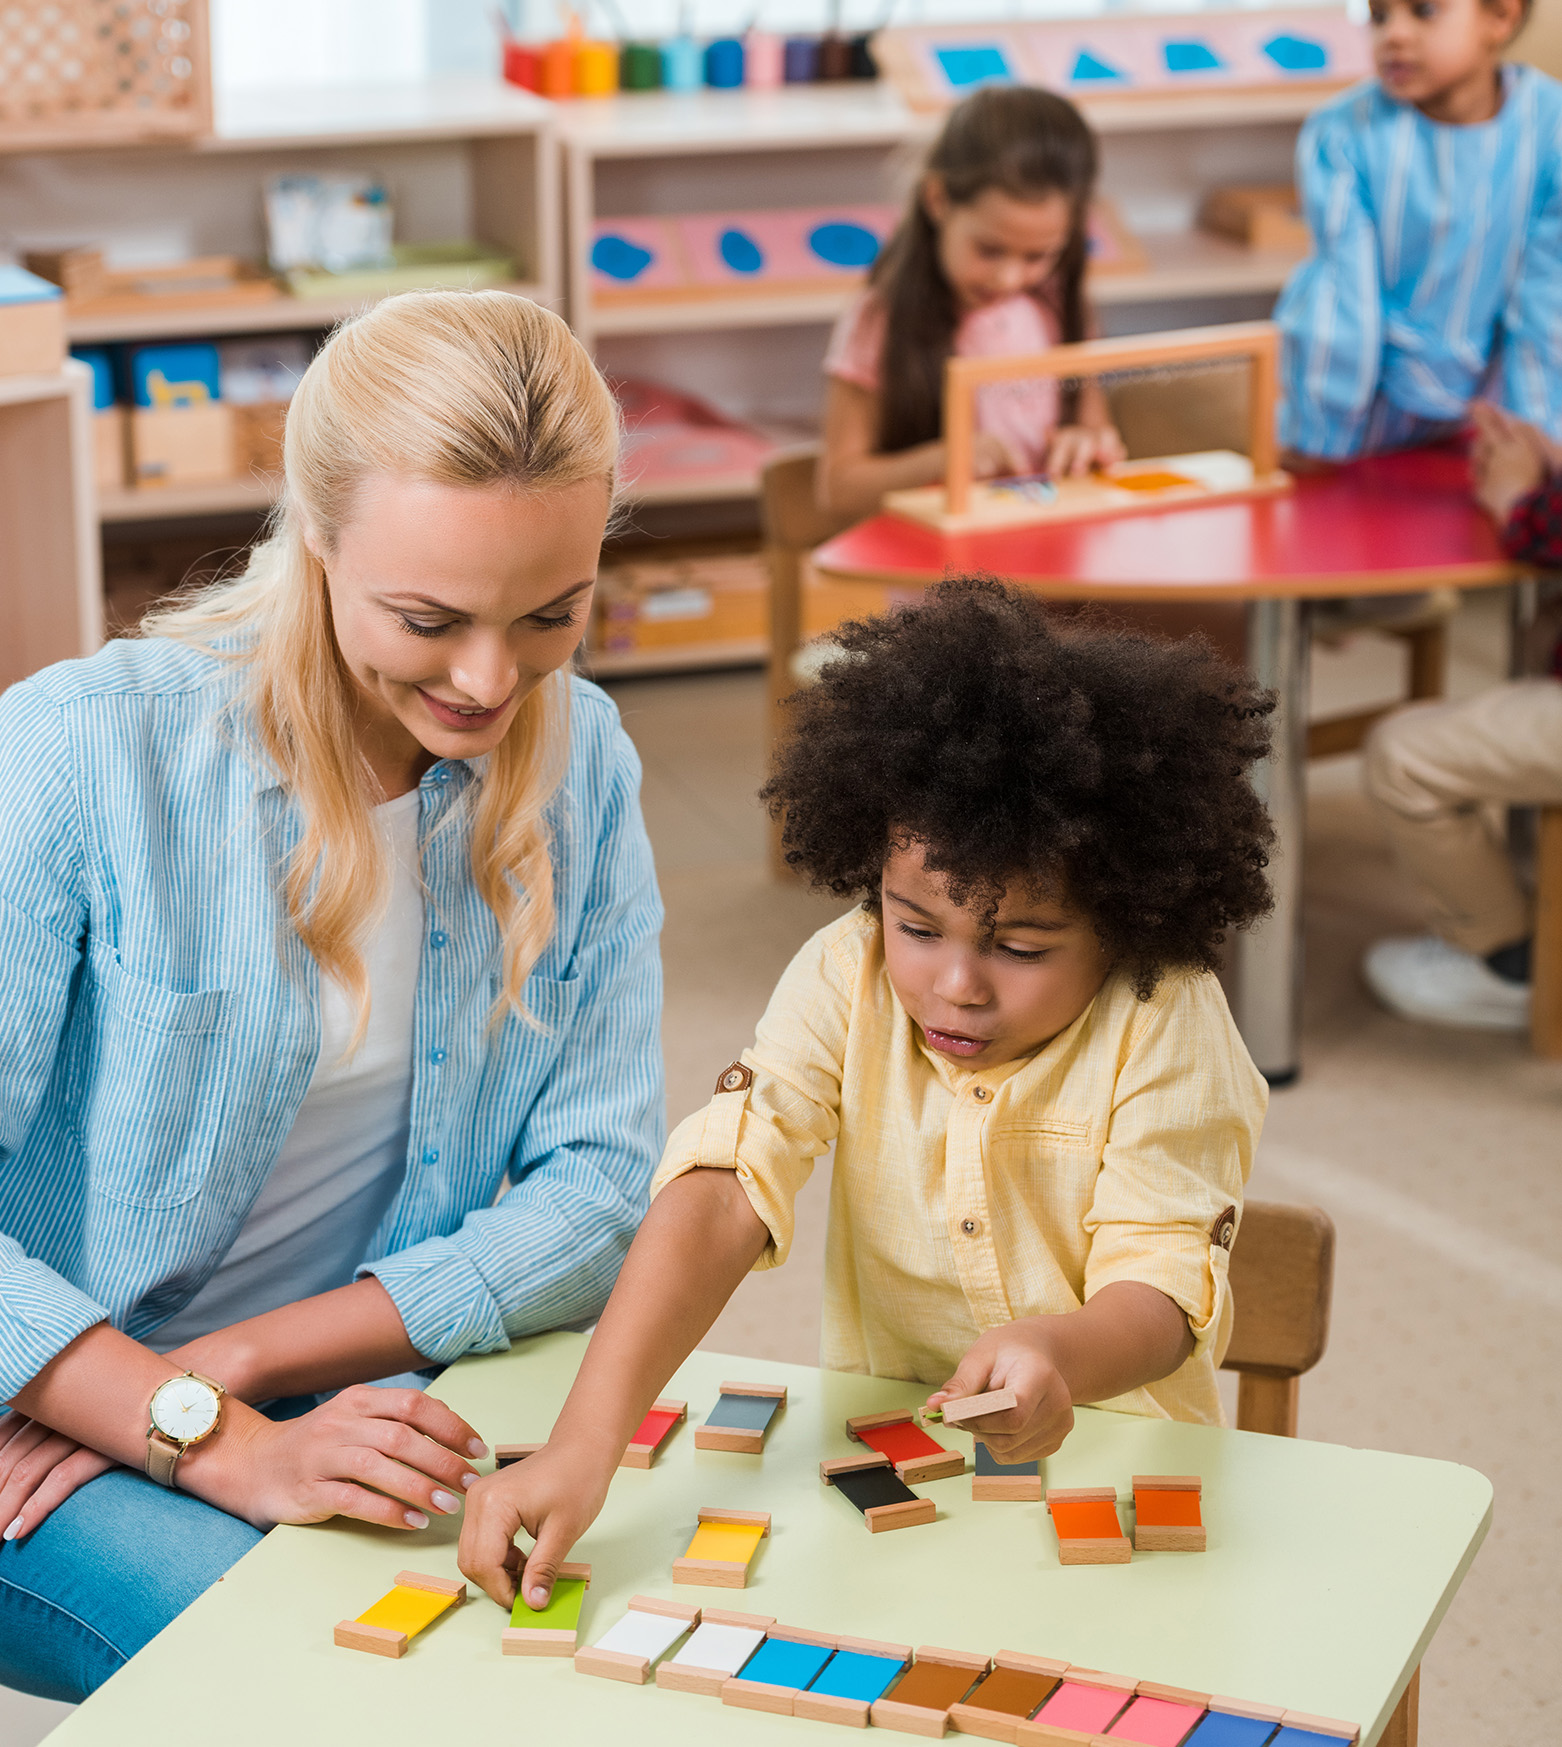 child playing game next to smiling teacher with kids at background in home daycare facility